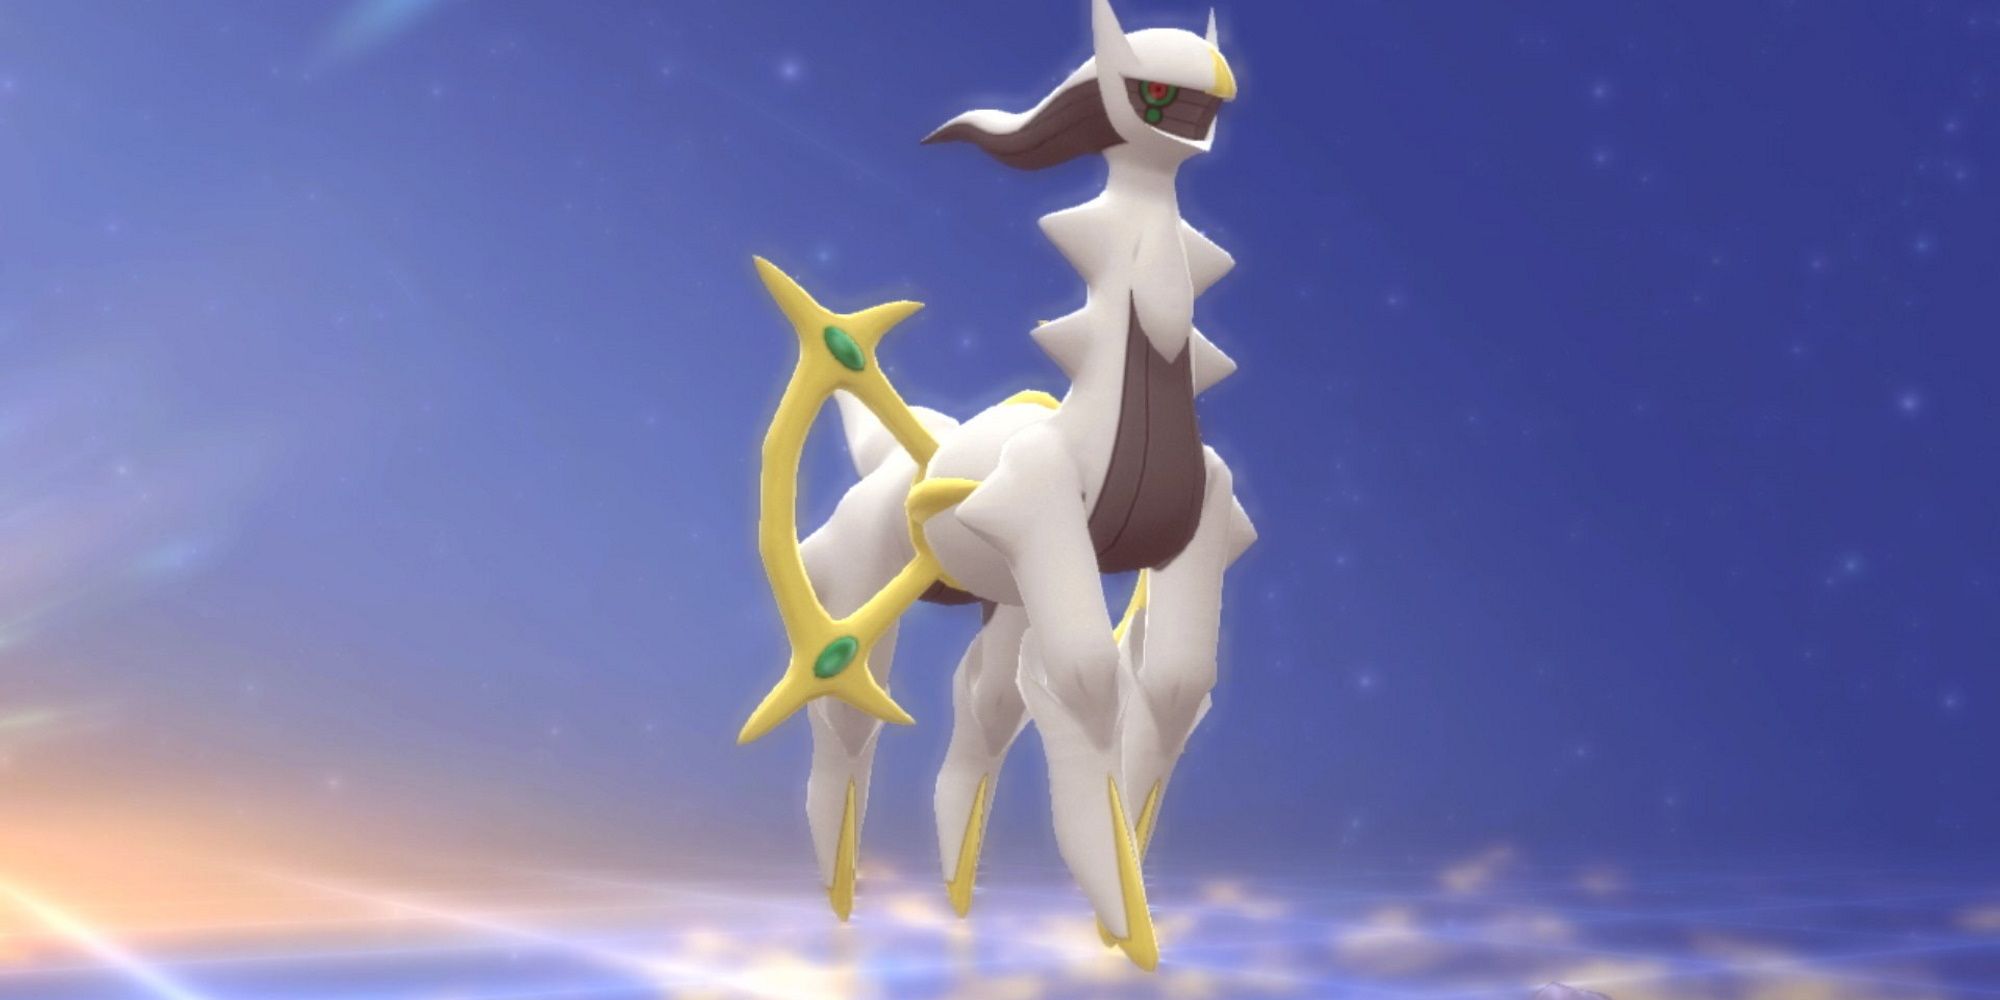 Arceus from Pokemon Diamond Pearl flying high in the sky against a bright light background.